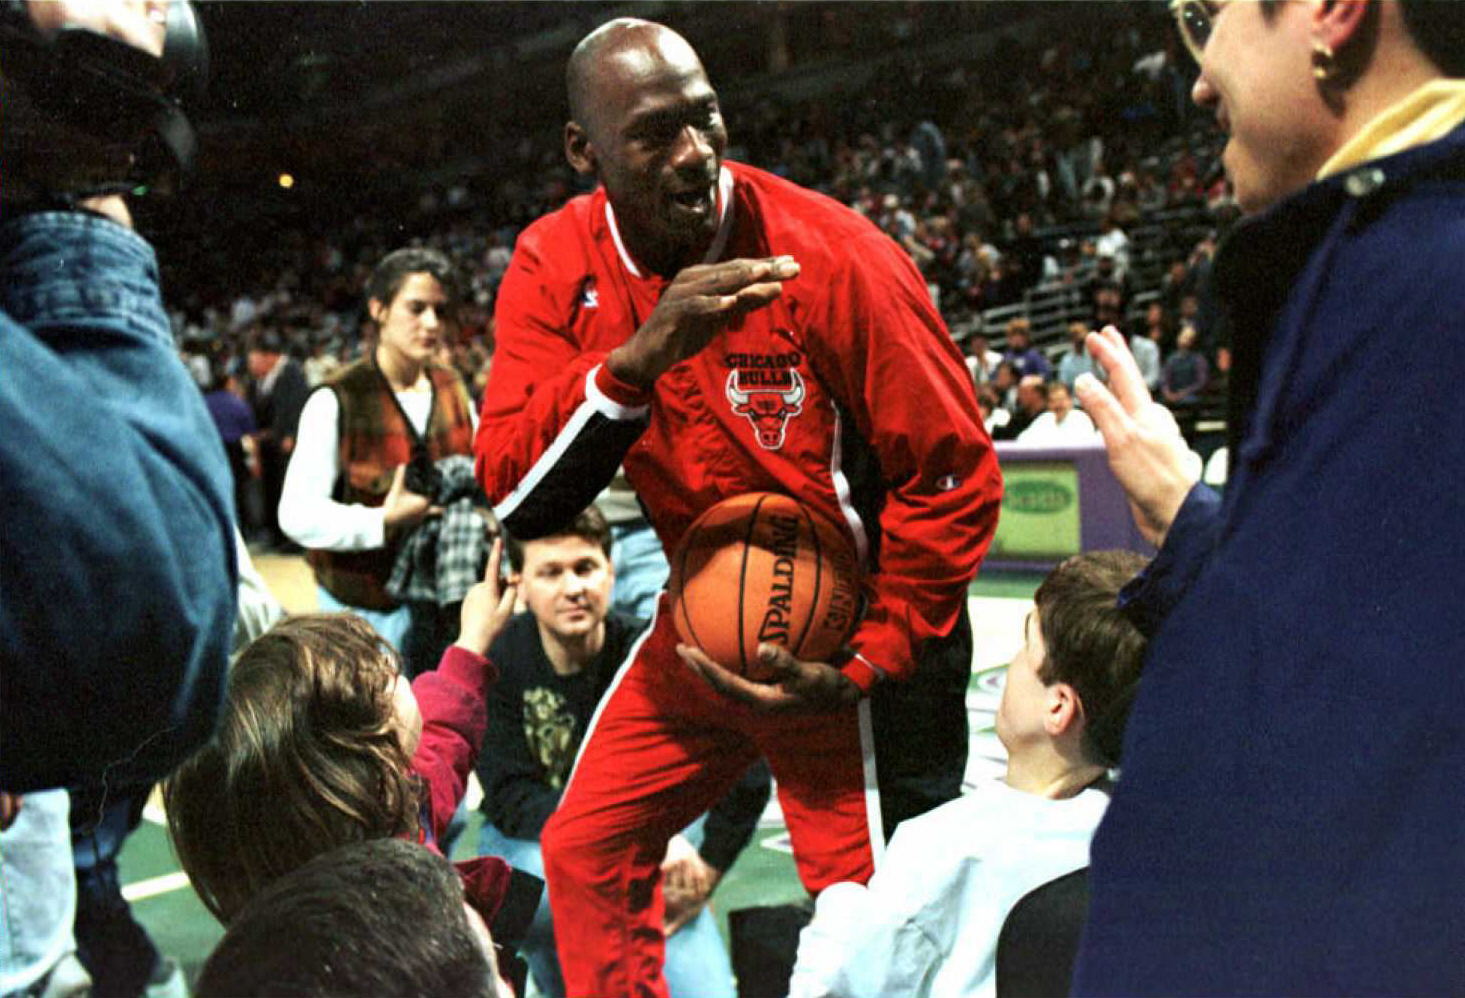 Michael Jordan has always had that competitive fire.